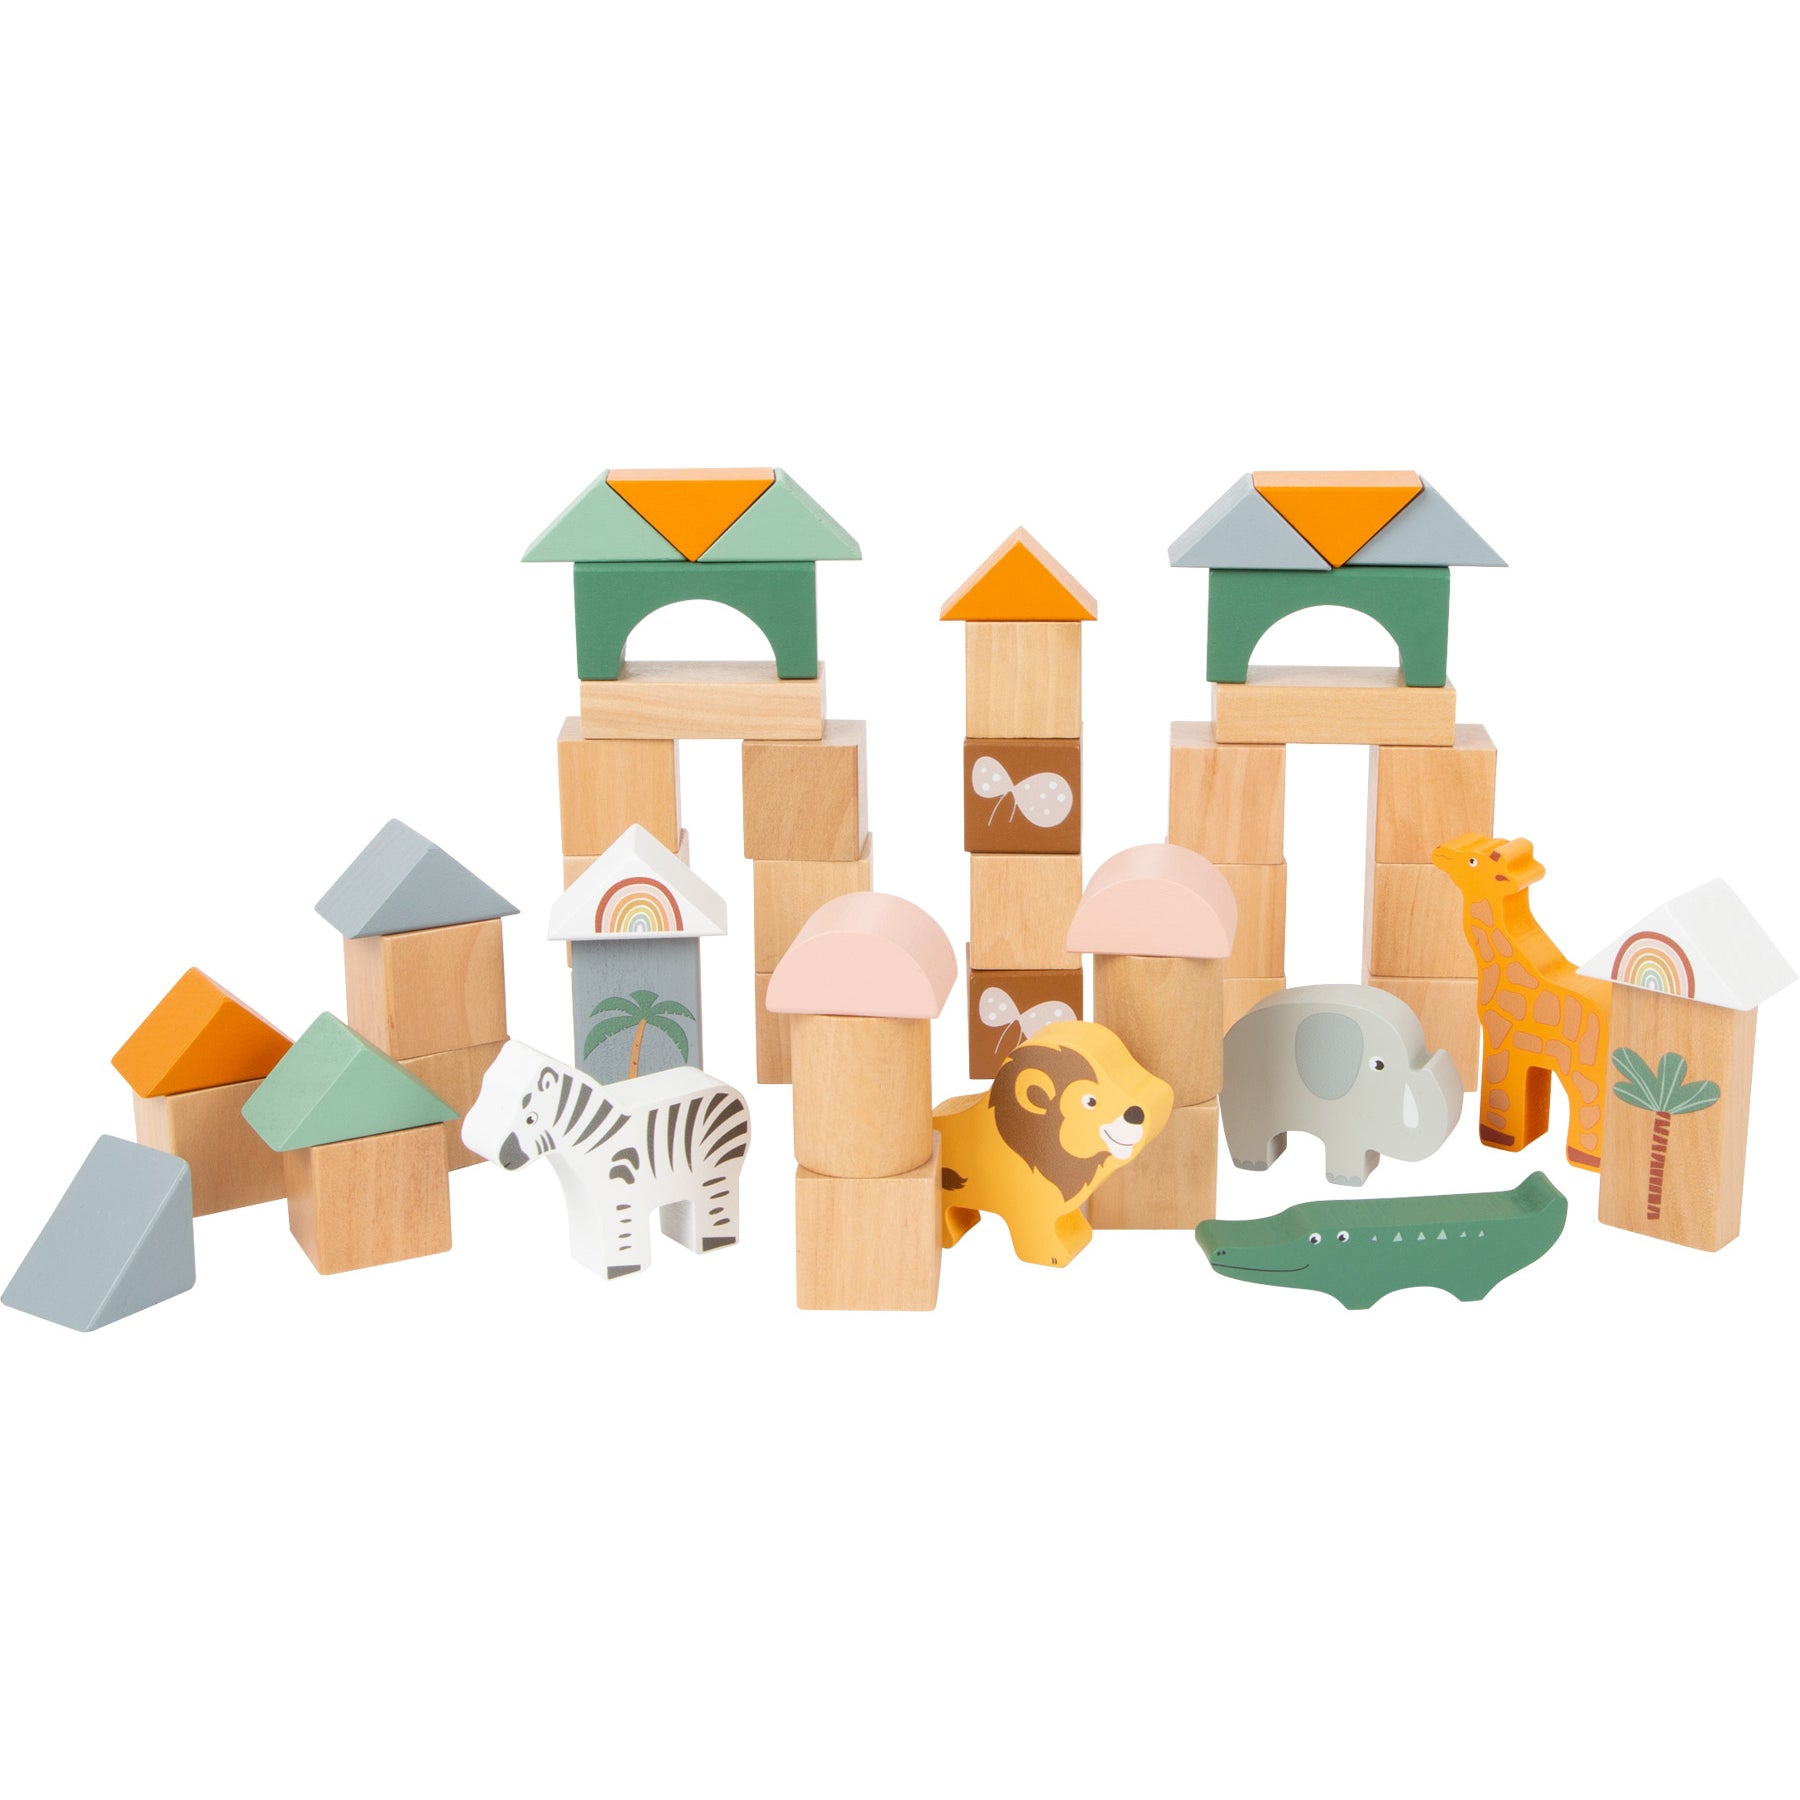 small foot building blocks - greens and oranges with safari animals